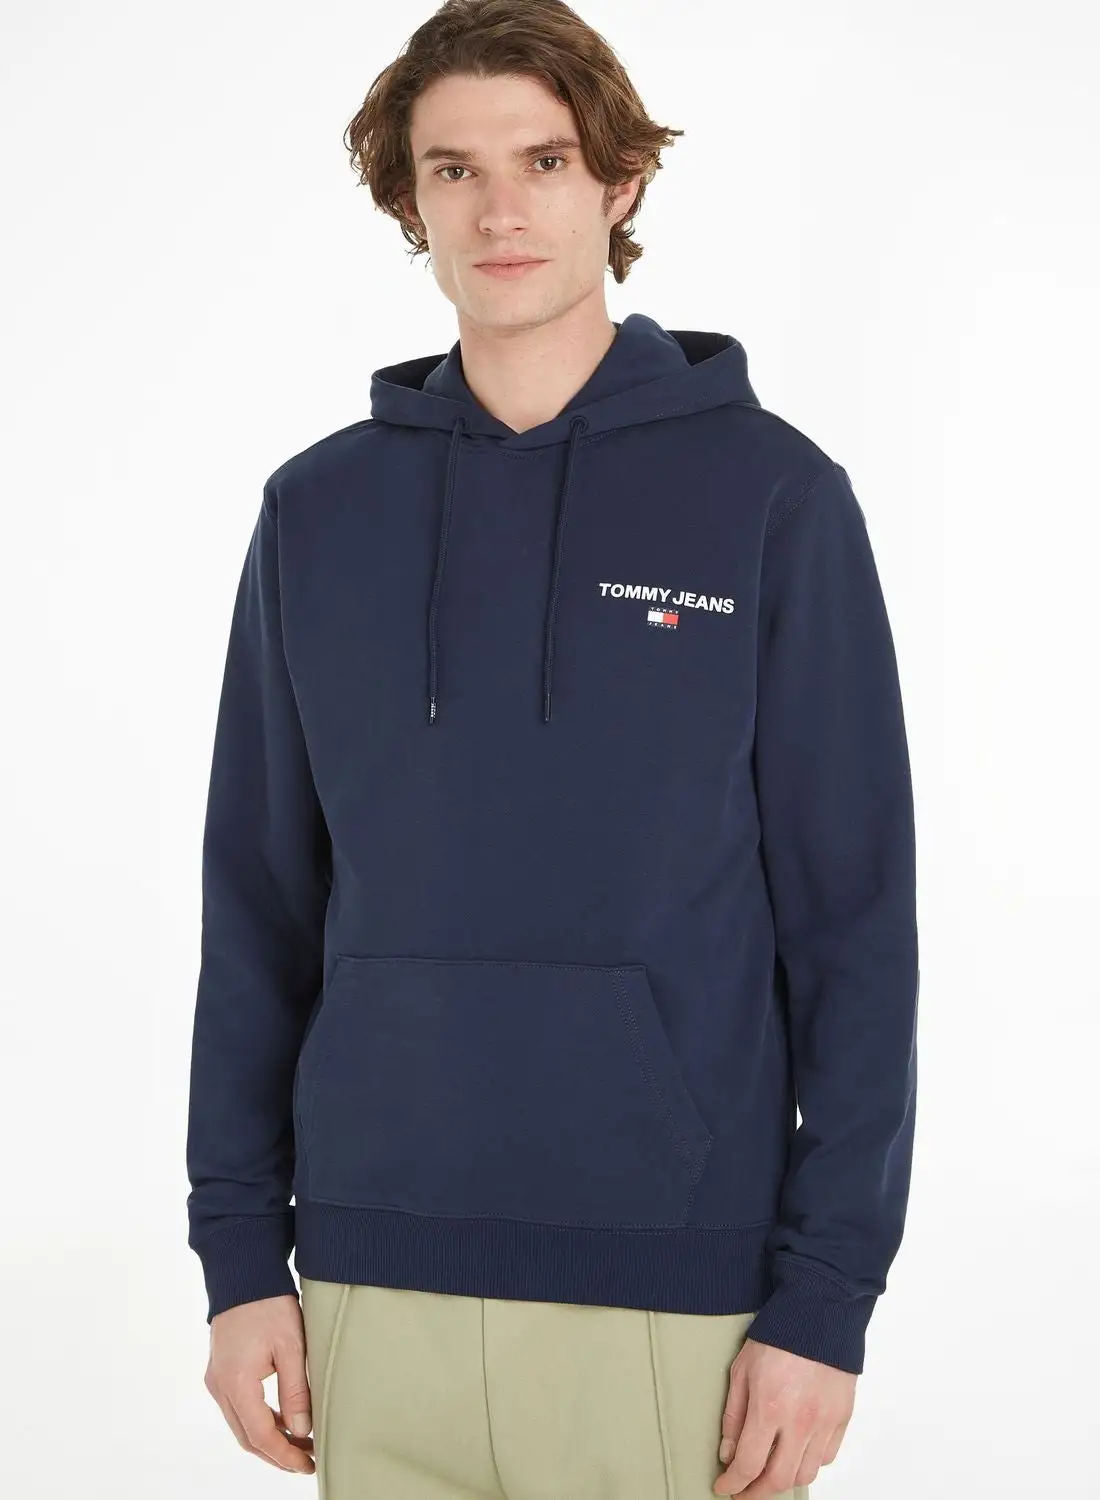 TOMMY JEANS Graphic Hoodie